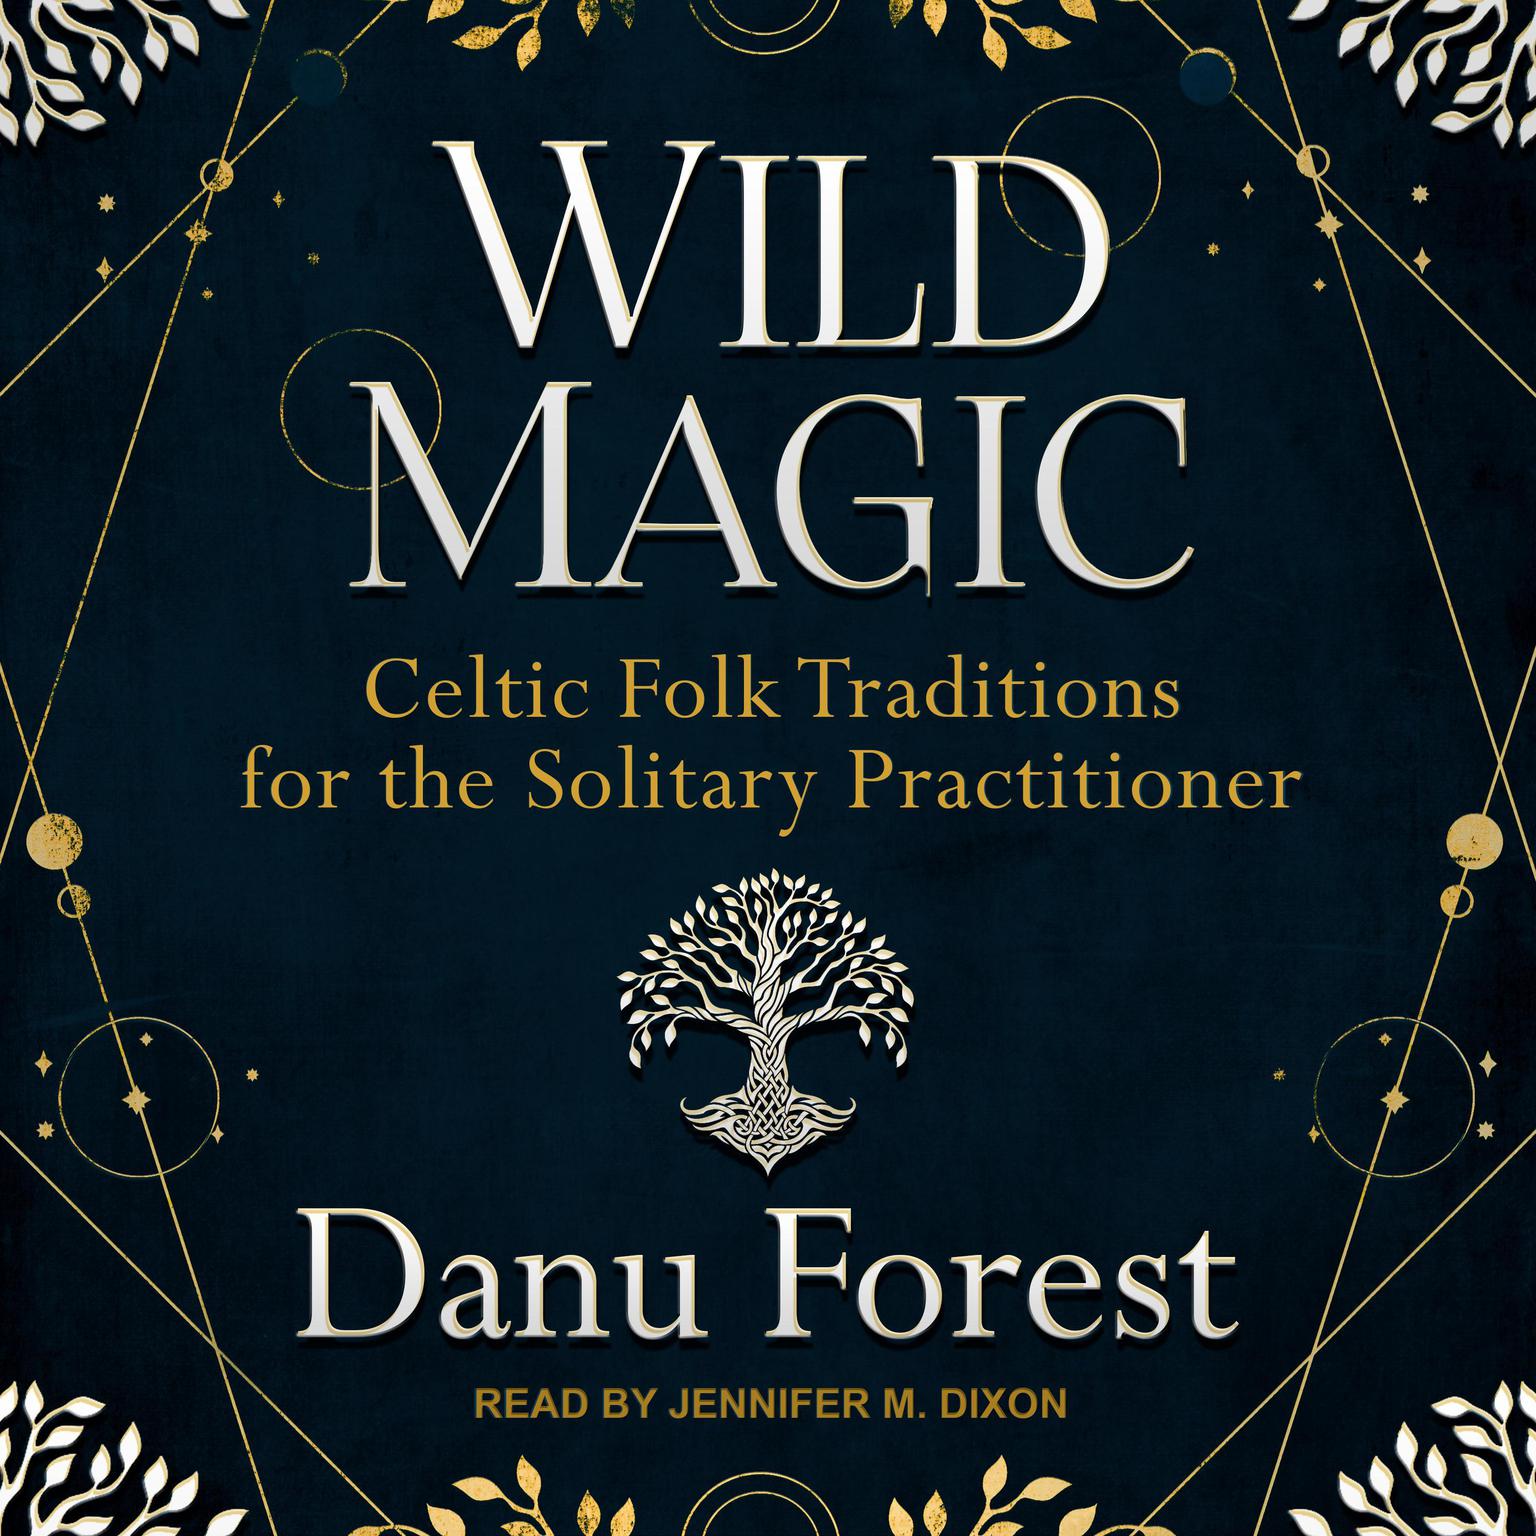 Wild Magic: Celtic Folk Traditions for the Solitary Practitioner Audiobook, by Danu Forest